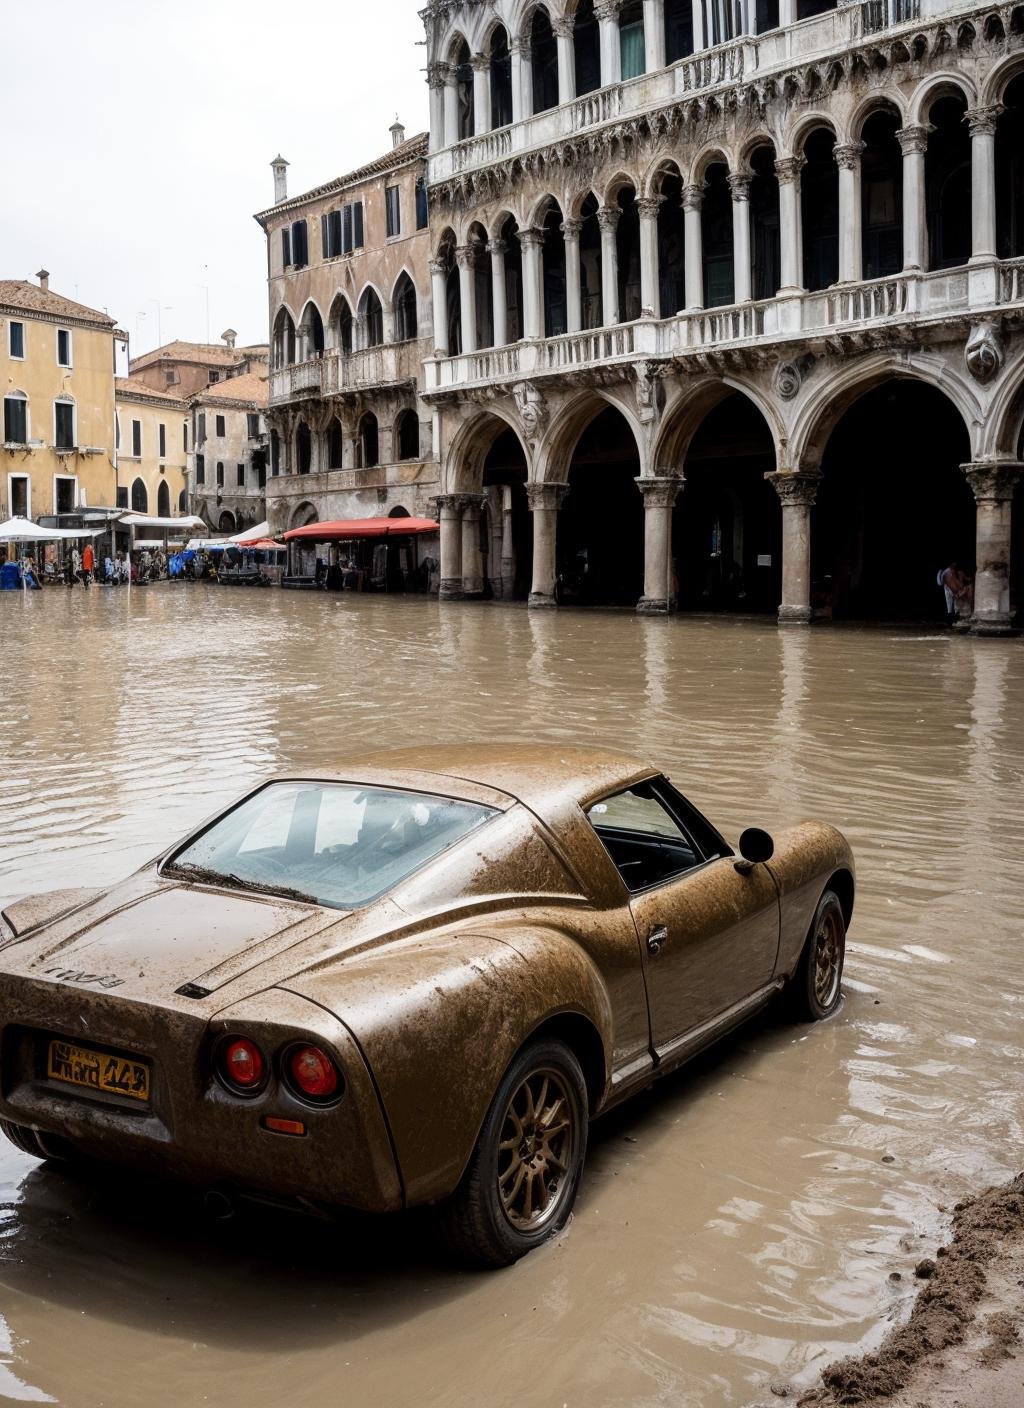 rthprsn a sports car in a mud <lora:locon_conceptearth_v1_from_v1_64_32:0.75>, by Edward Weston, in Venice, at the St. Marks Square<lora:add_detail:0.7>car covered in mud